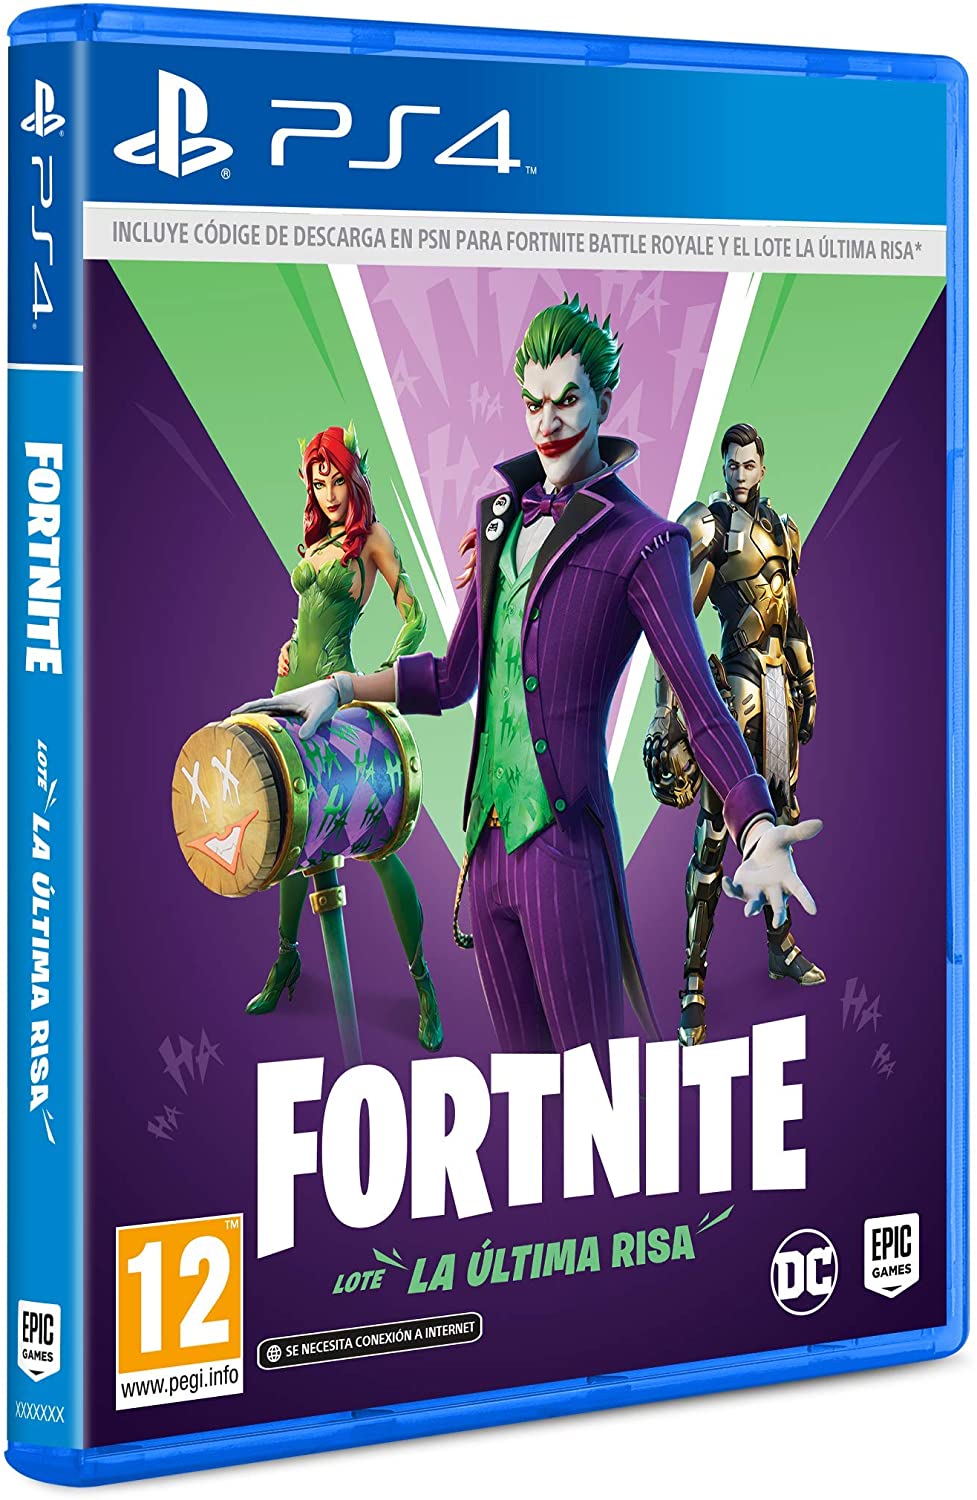 Fornite Batch The Last PS4 Laughter 